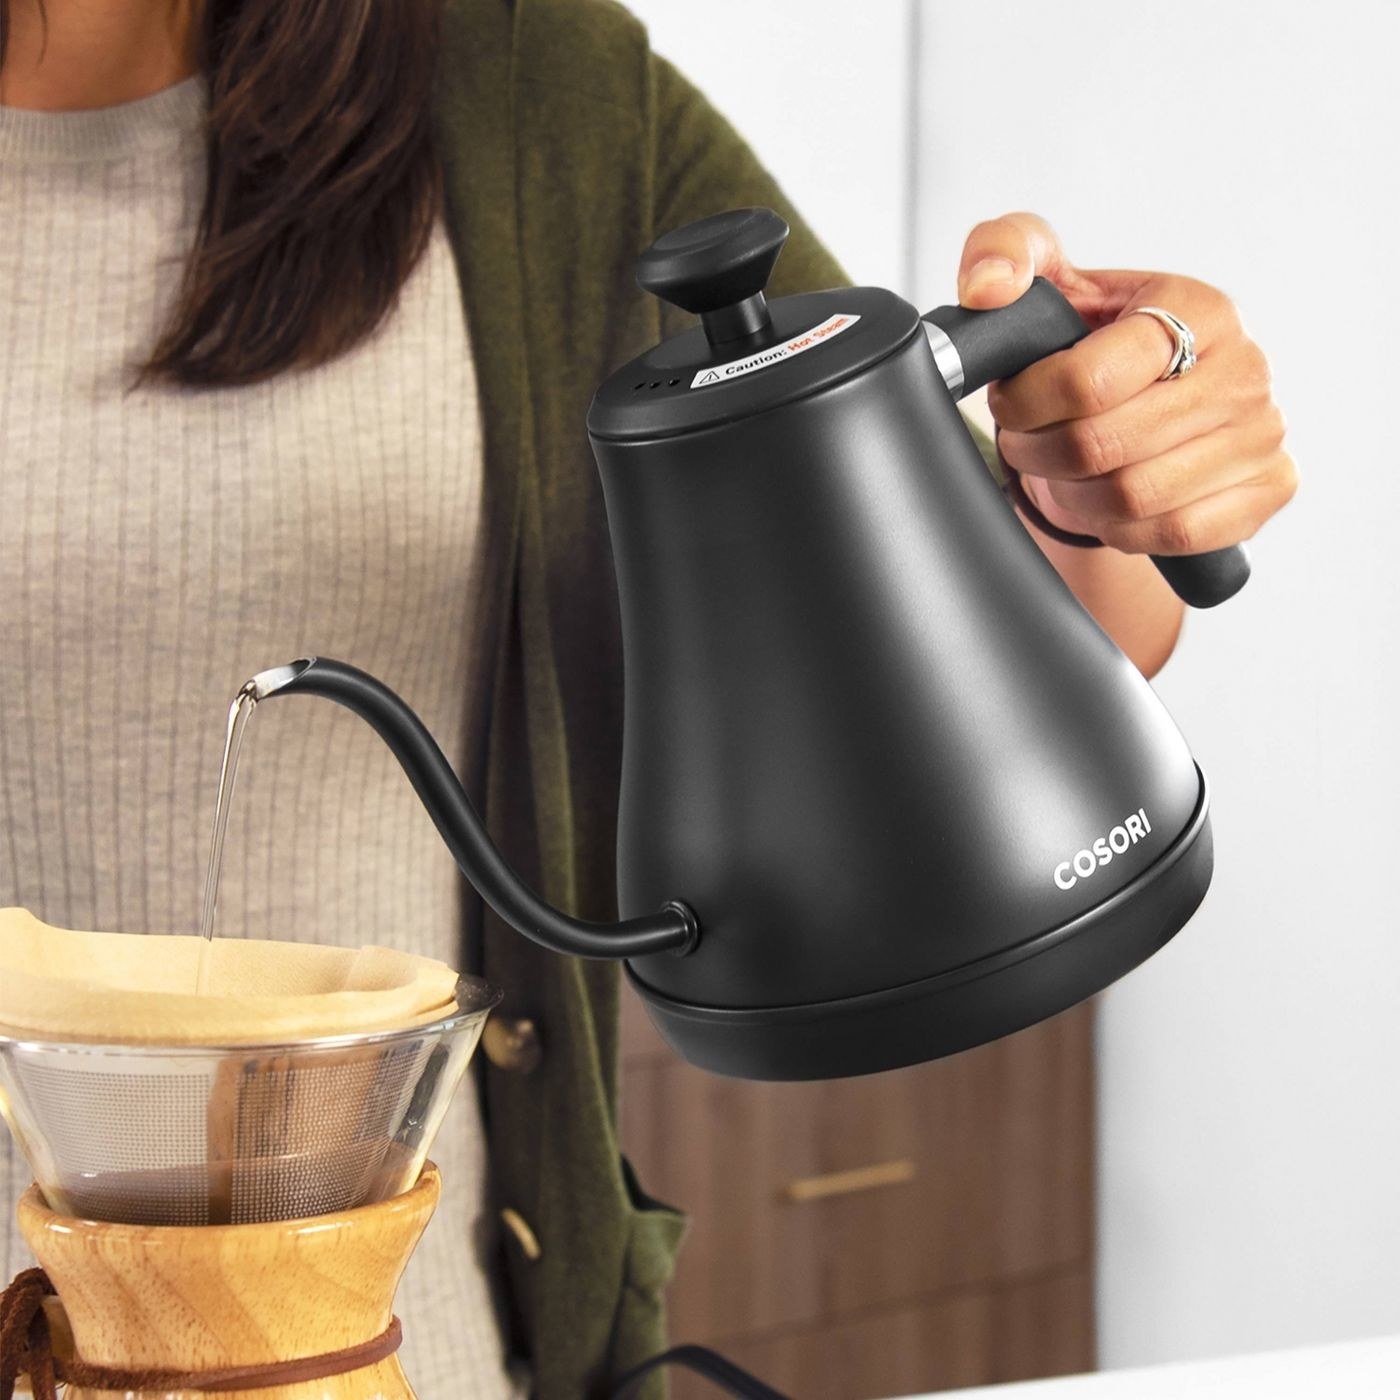 A model uses the black kettle to pour water into a carafe